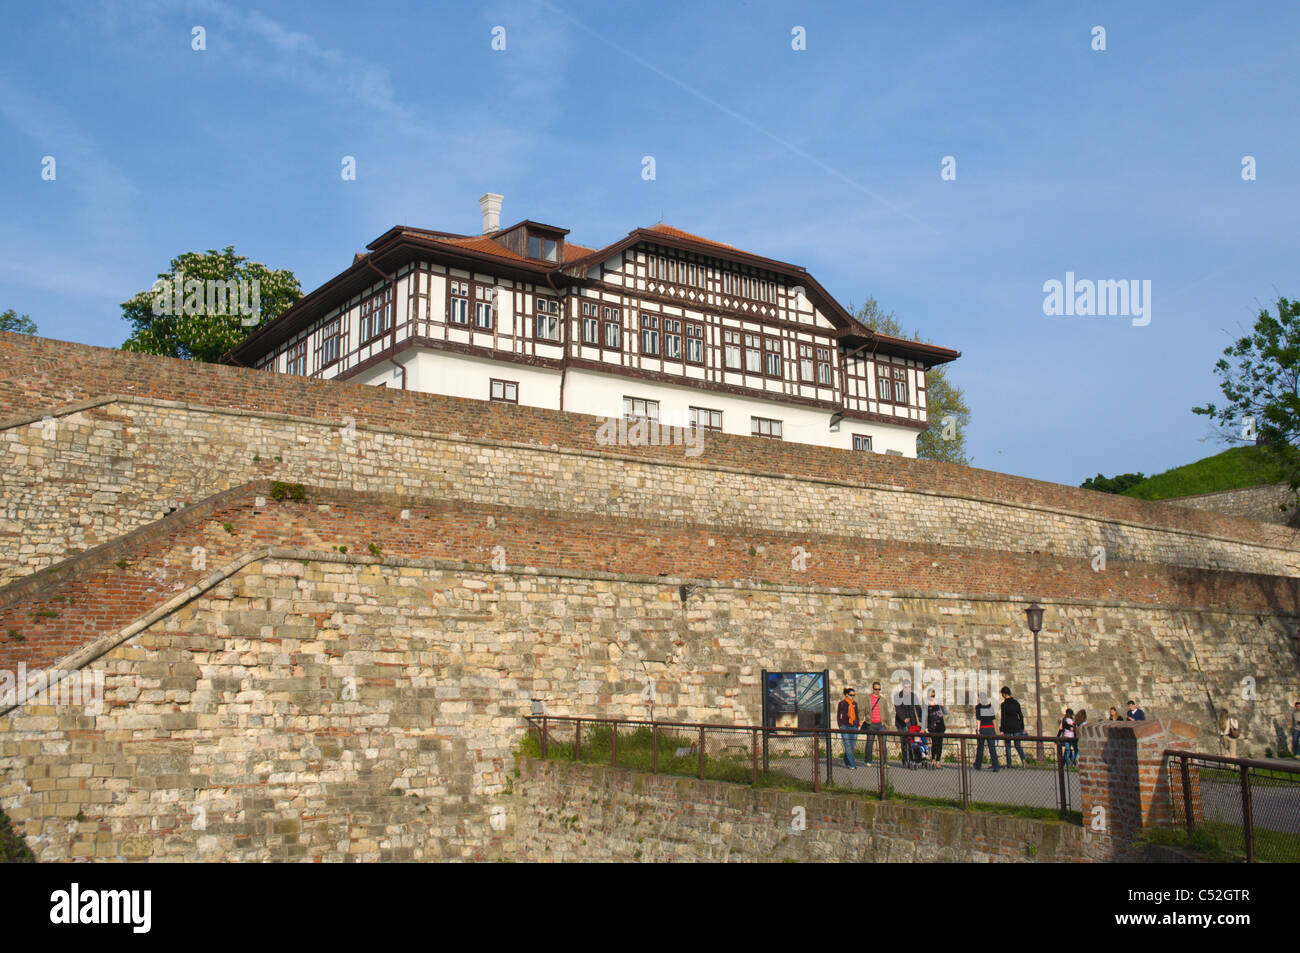 City Institute for the Protection of Cultural Monuments building Kalemegdan fortress park central Belgrade Serbia Europe Stock Photo